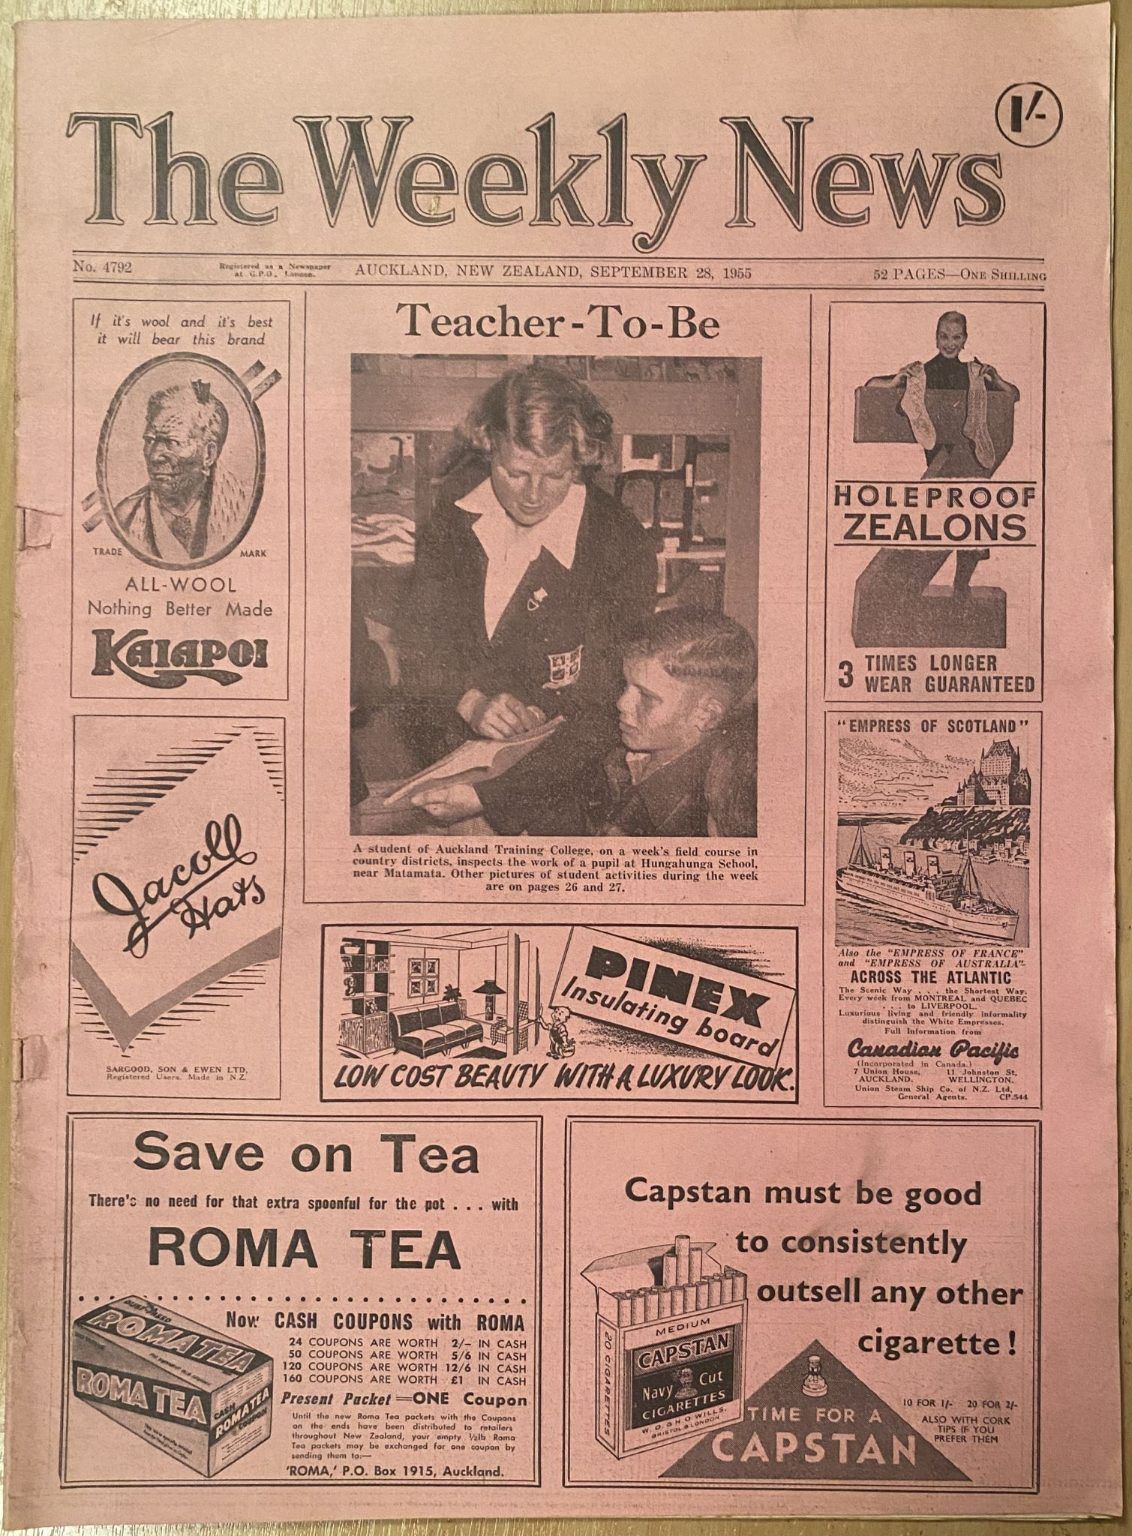 OLD NEWSPAPER: The Weekly News - No. 4792, 28 September 1955